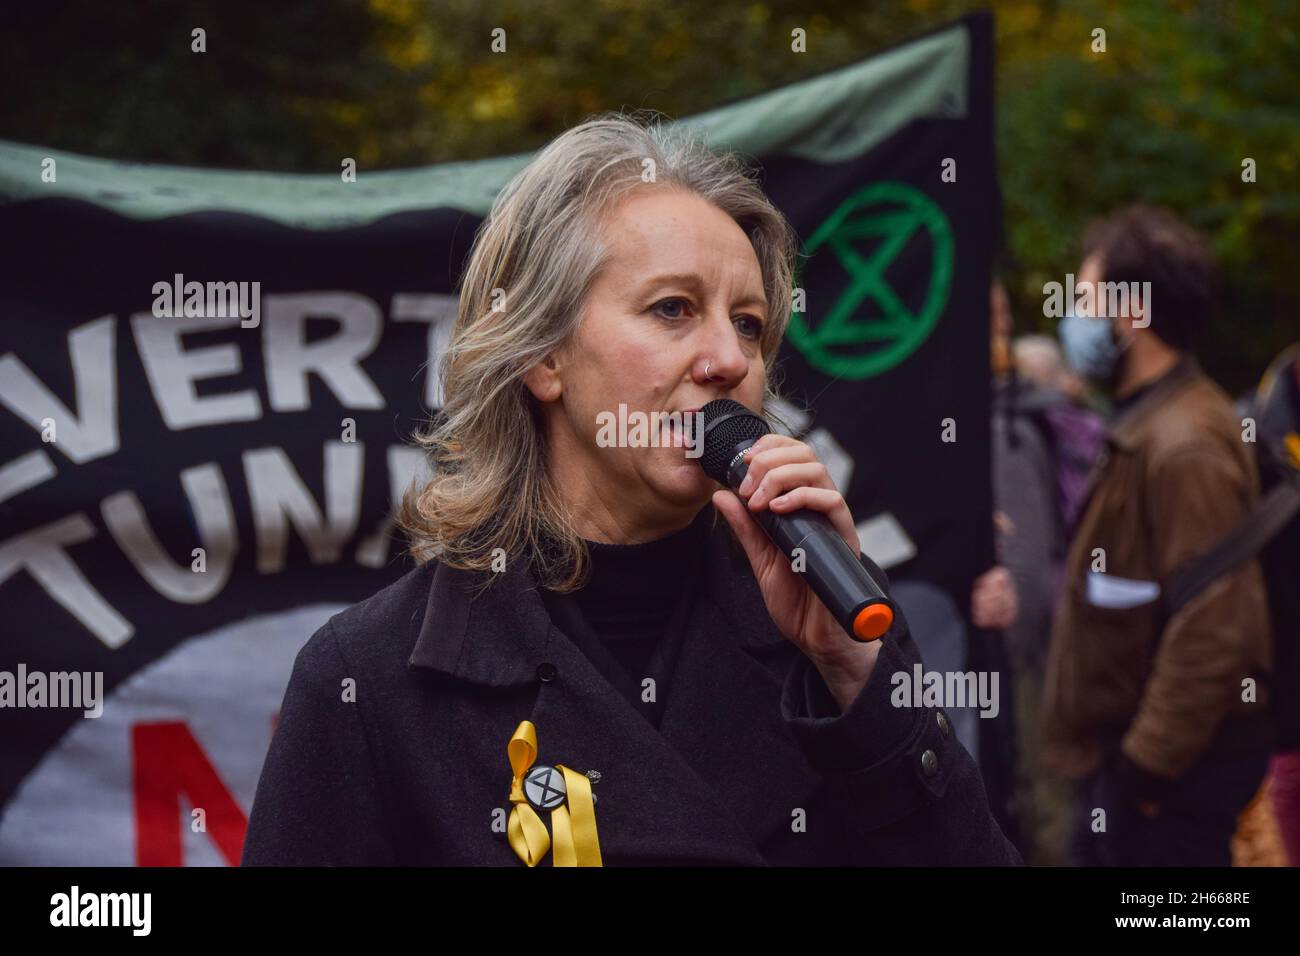 London, UK. 13th November 2021. Extinction Rebellion co-founder Gail Bradbrook speaks at Lincoln's Inn Fields. Extinction Rebellion demonstrators marched through the City of London, disrupting the Lord Mayor's Show in protest against the 'failure' of COP26. Credit: Vuk Valcic / Alamy Live News Stock Photo